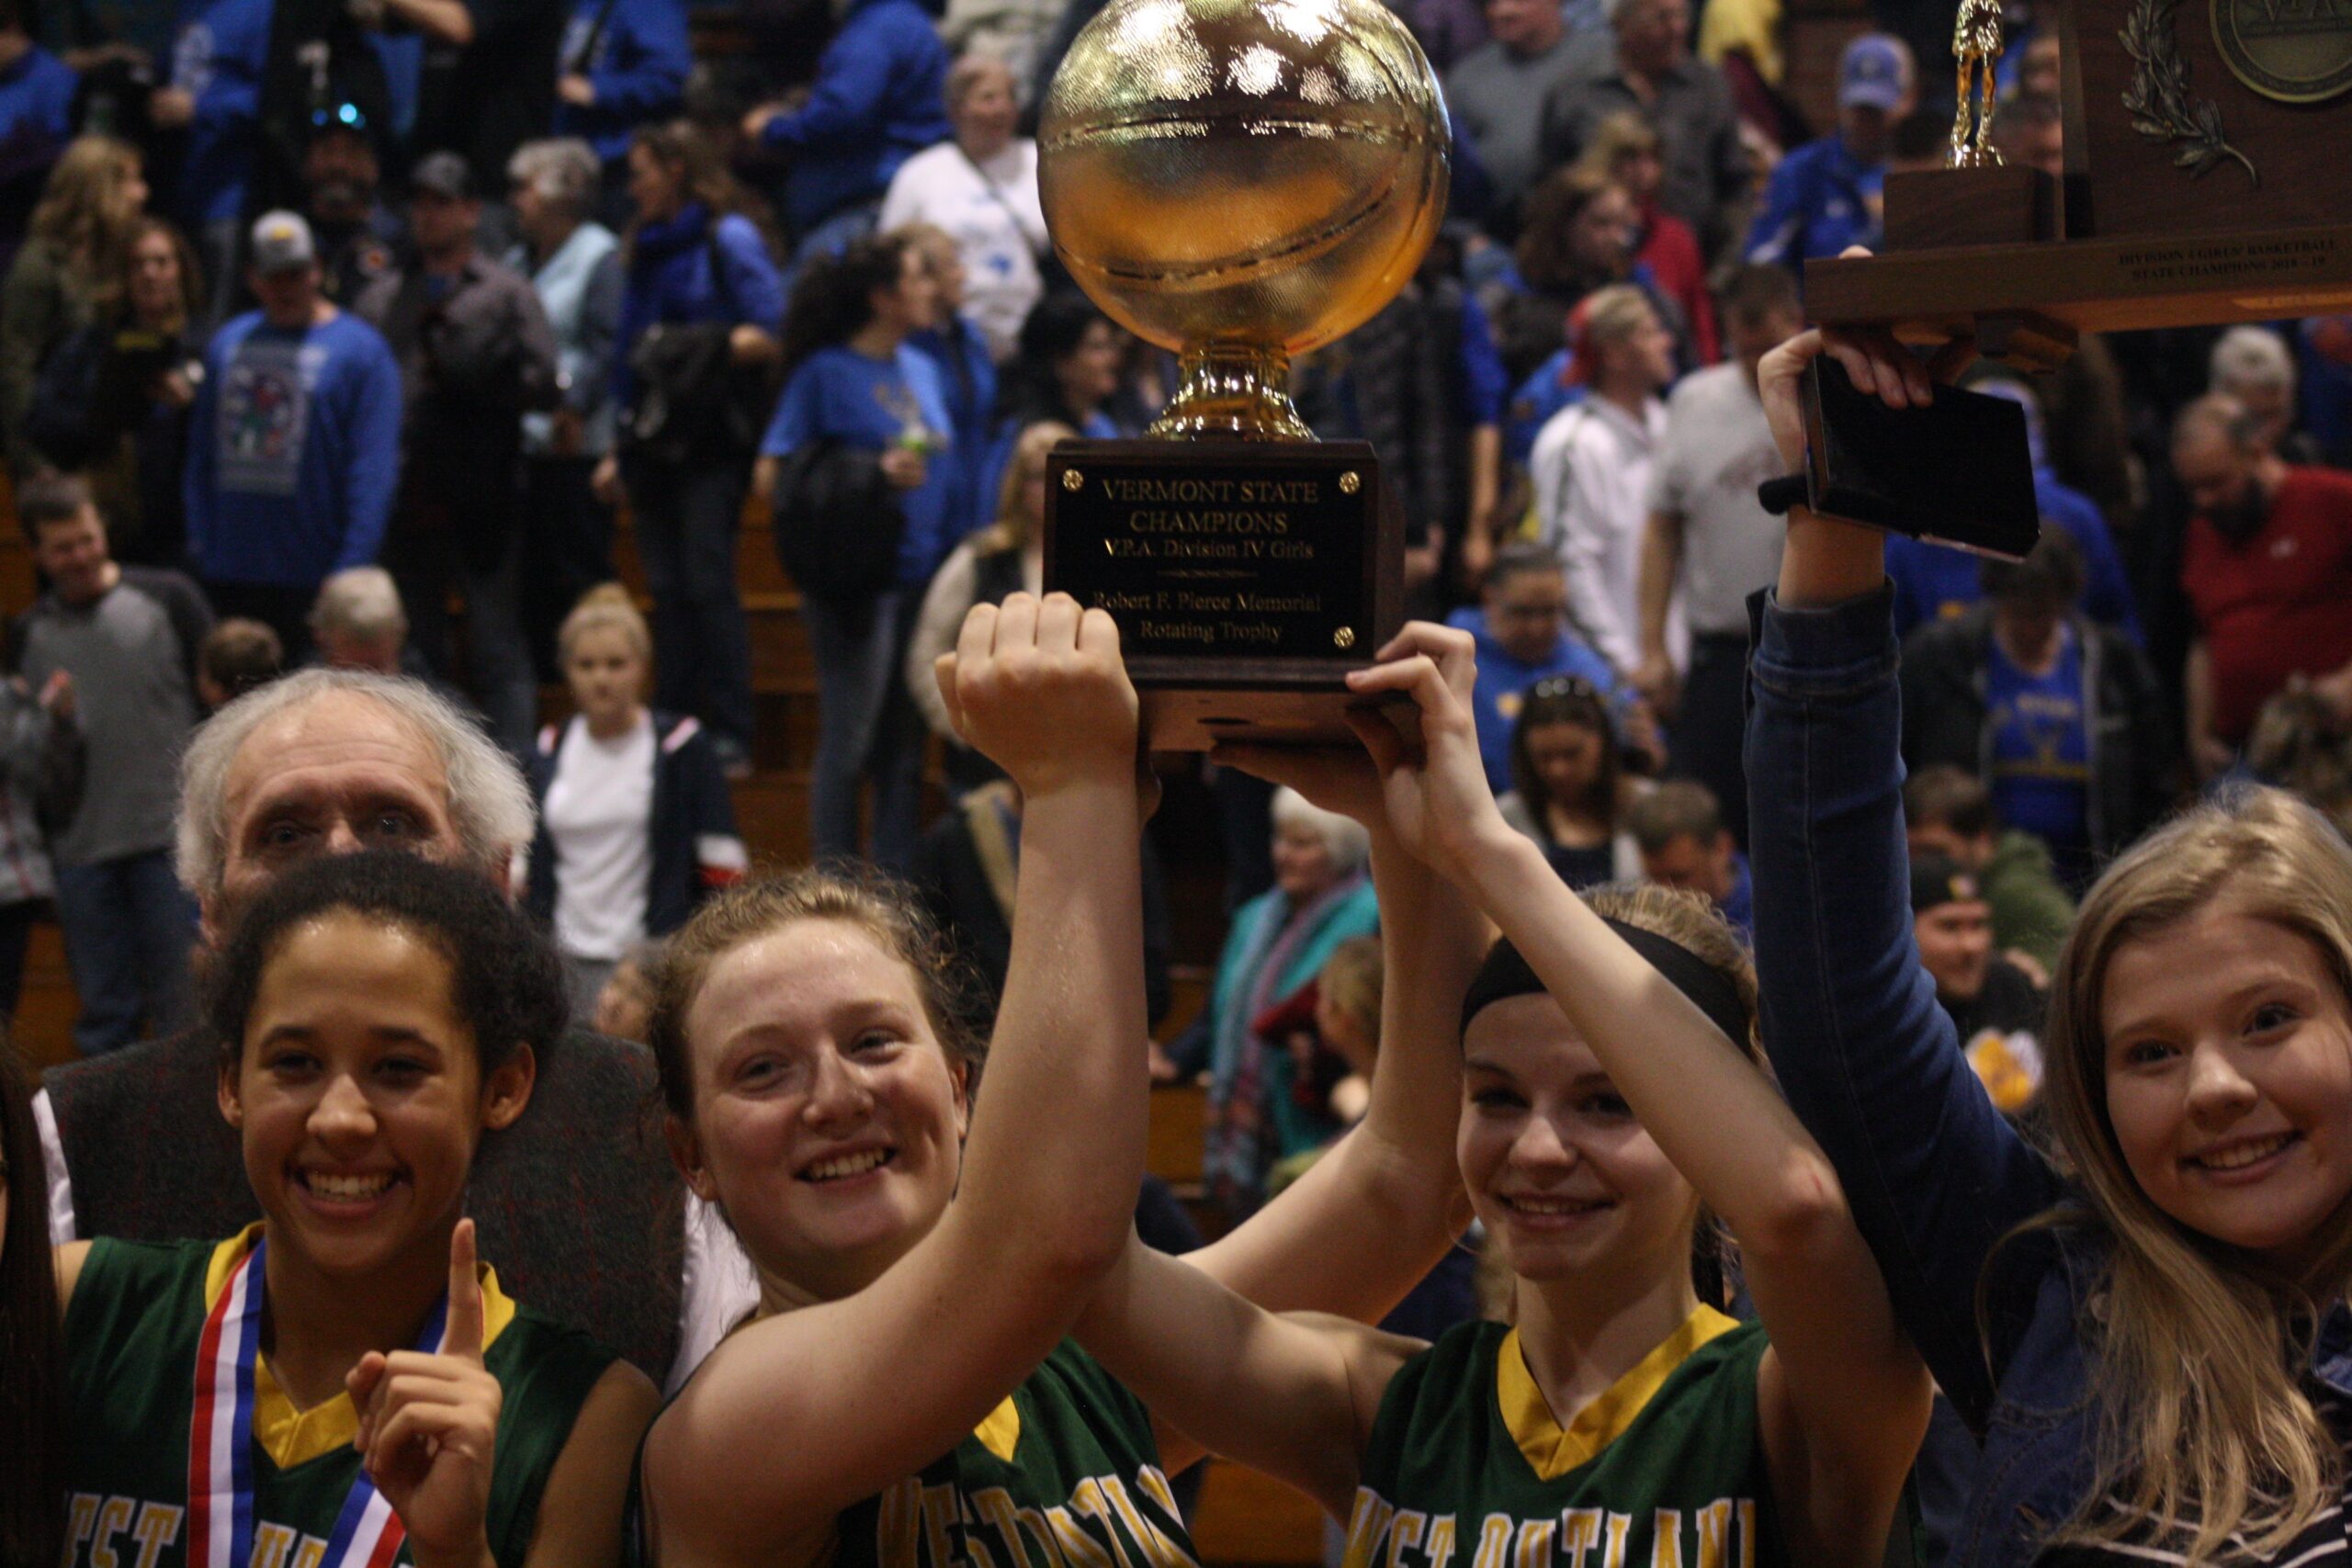 West Rutland girls Division IV state champs!